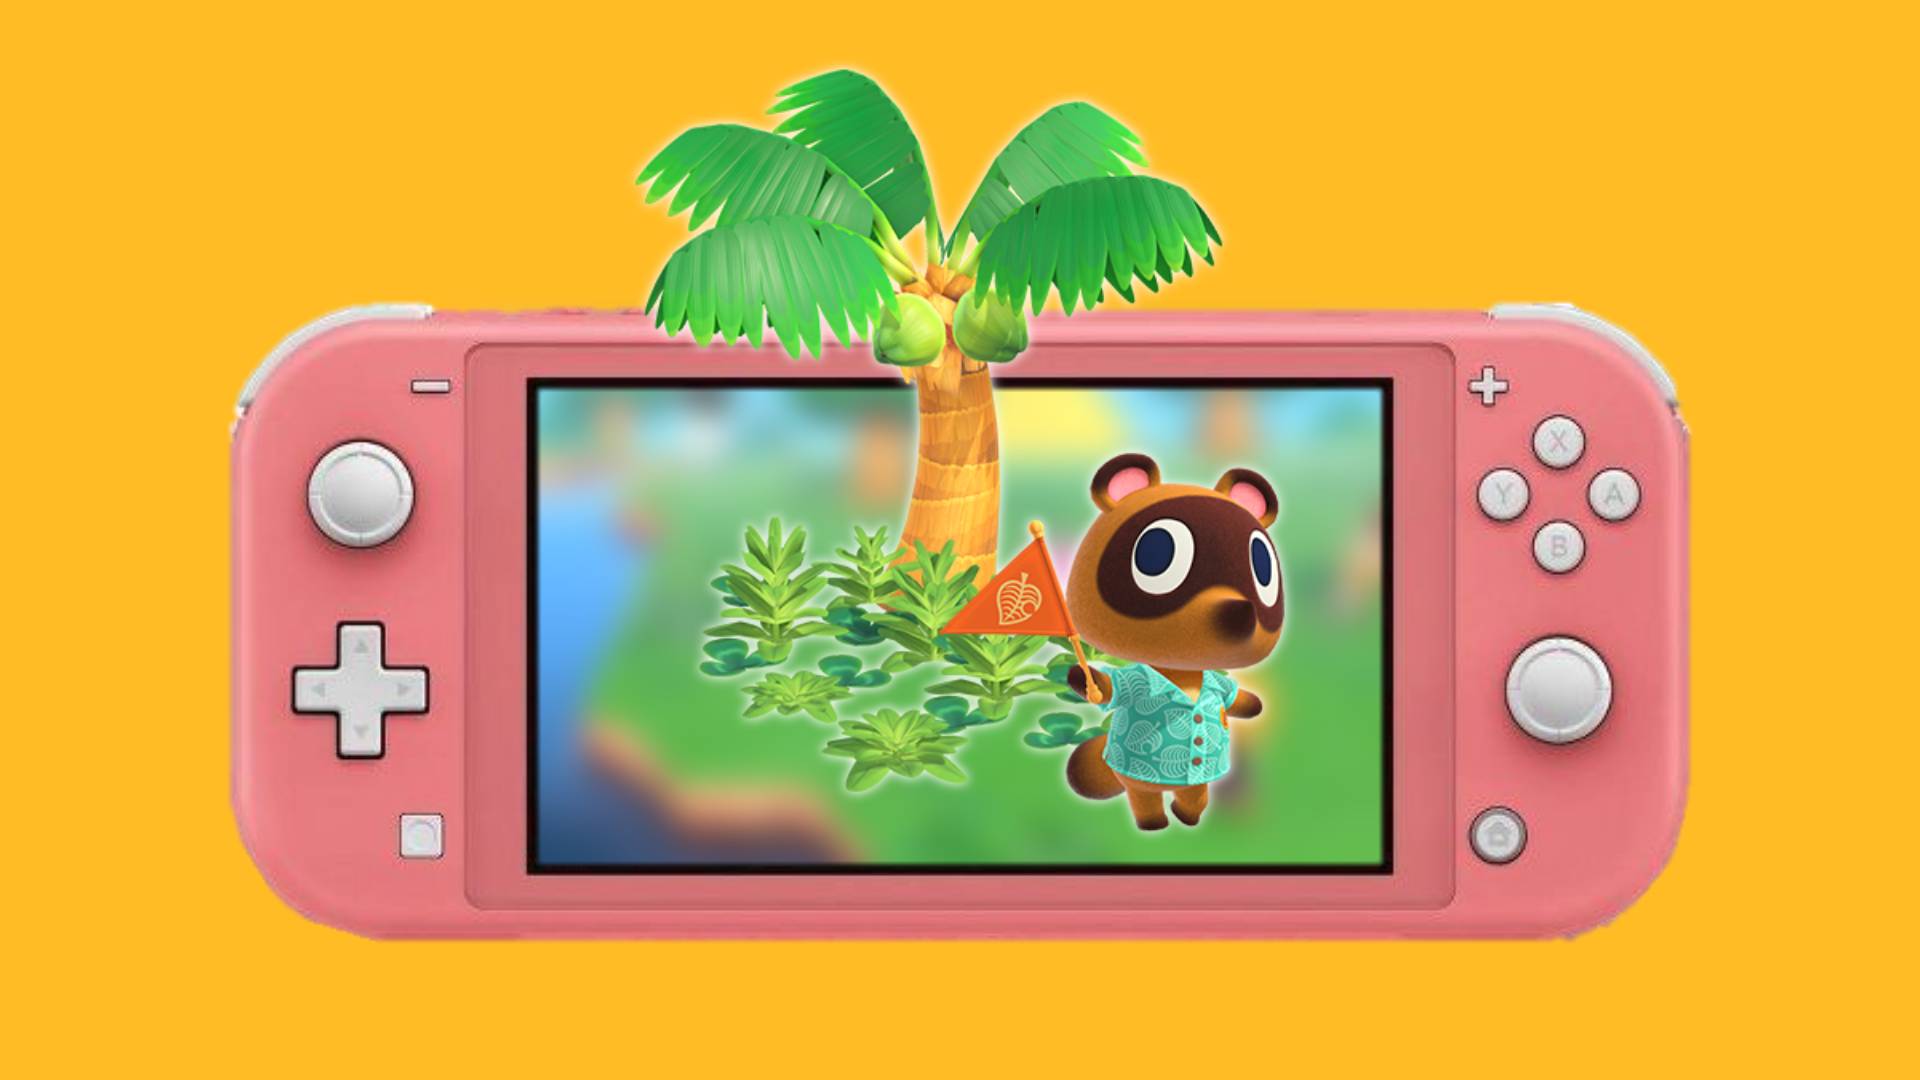 Get your bells ready for a cute new Animal Crossing Switch Lite